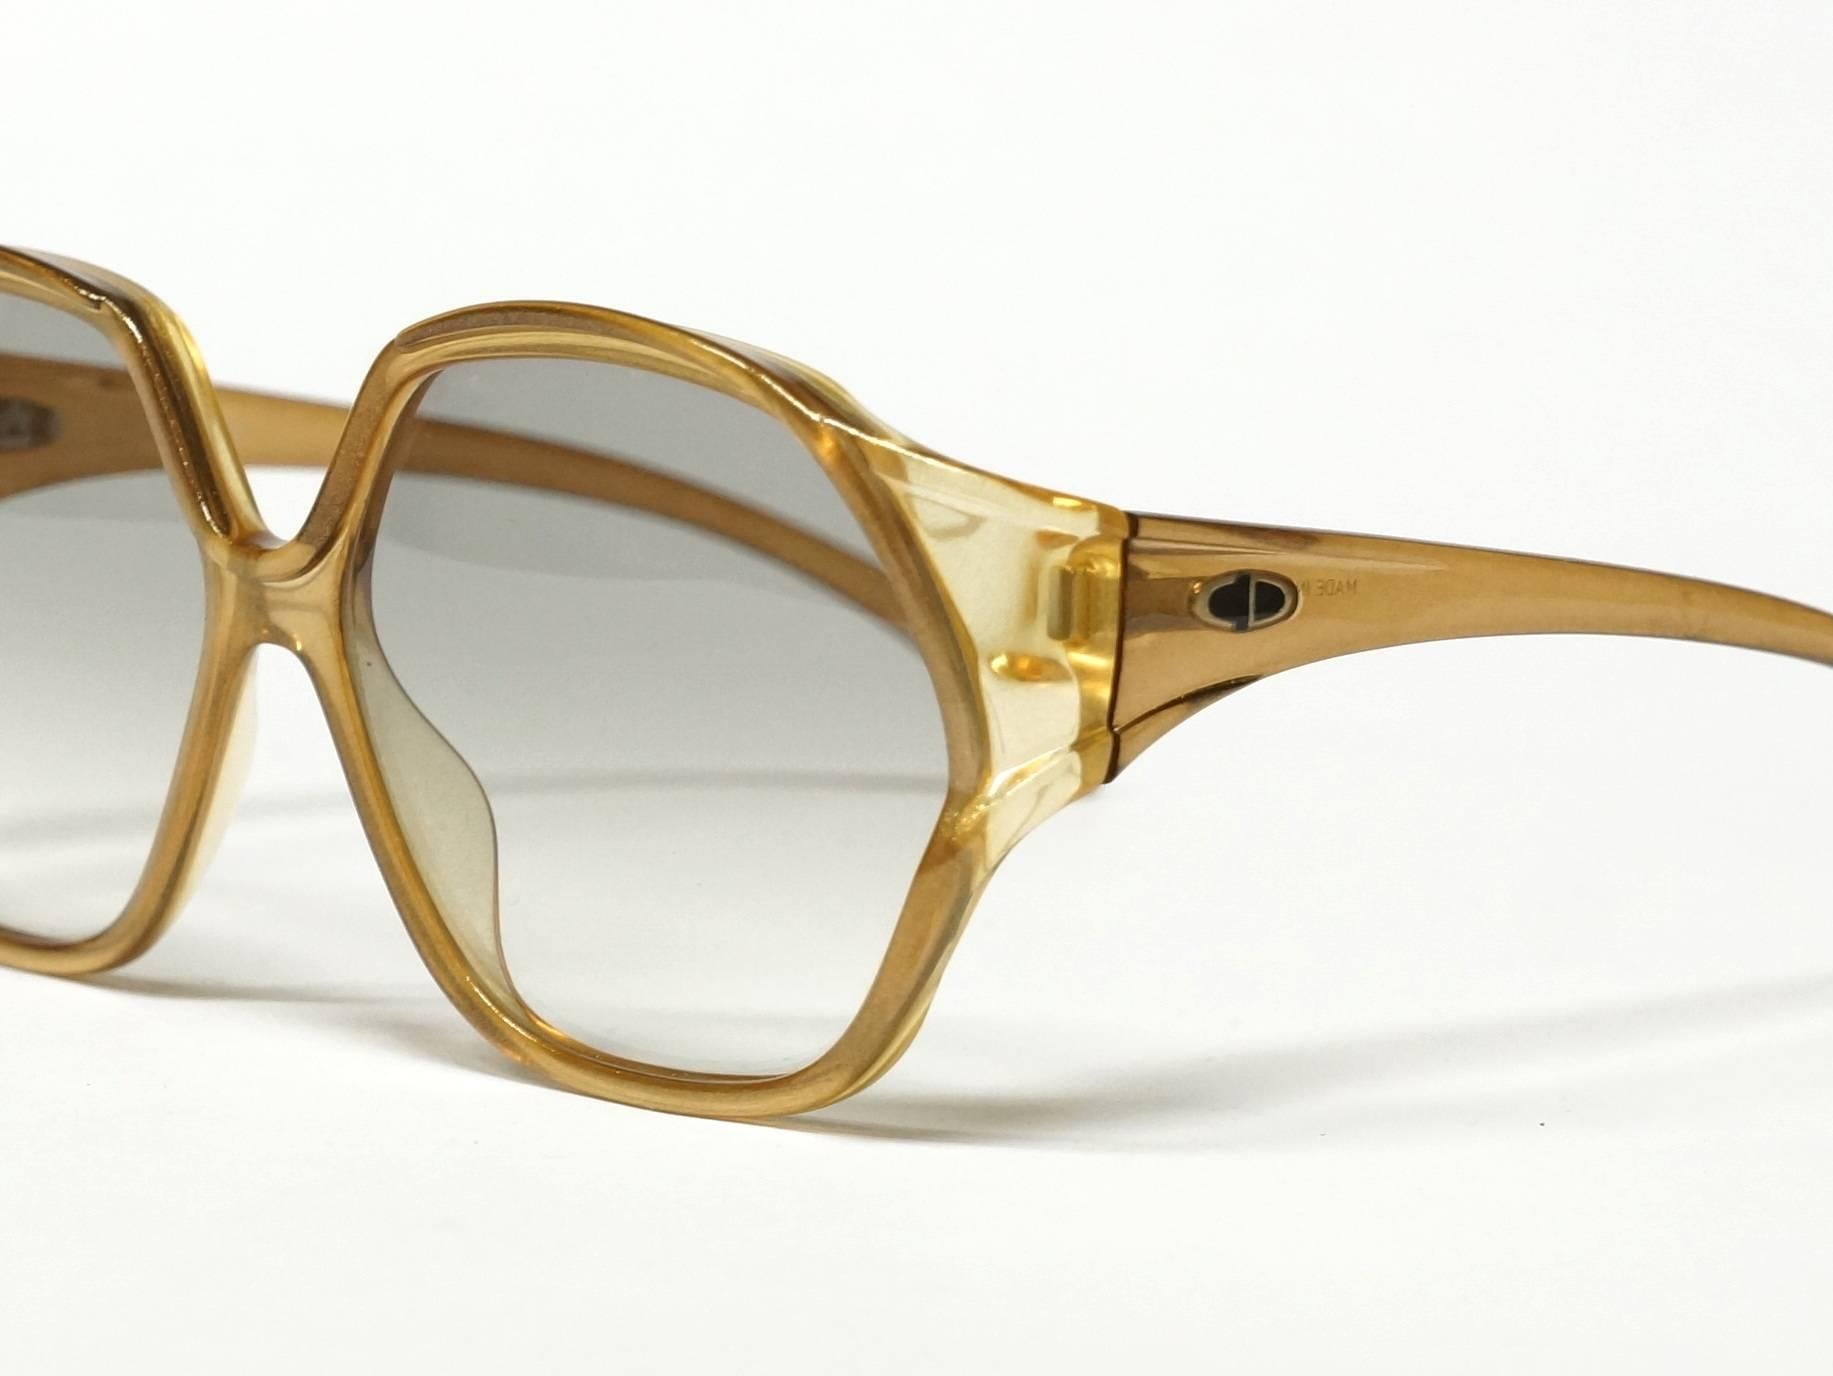 1970s Dior Oversized Sunglasses in New Old Stock Condition For Sale 2